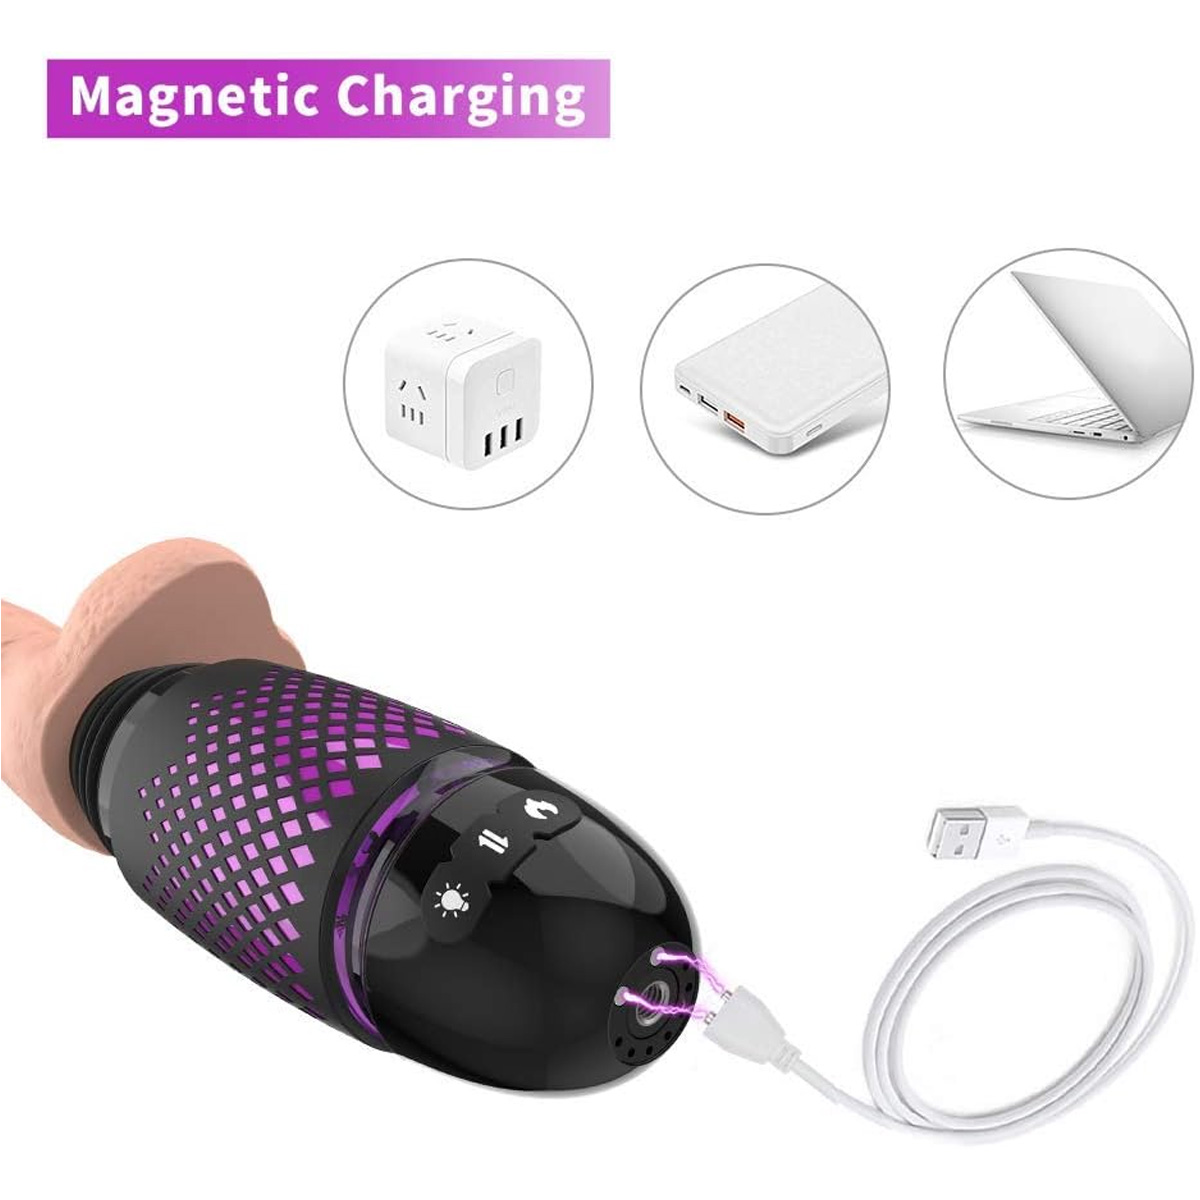 USB rechargeable automatic realistic heating thrusting vibrating dildo sex toy machine for women